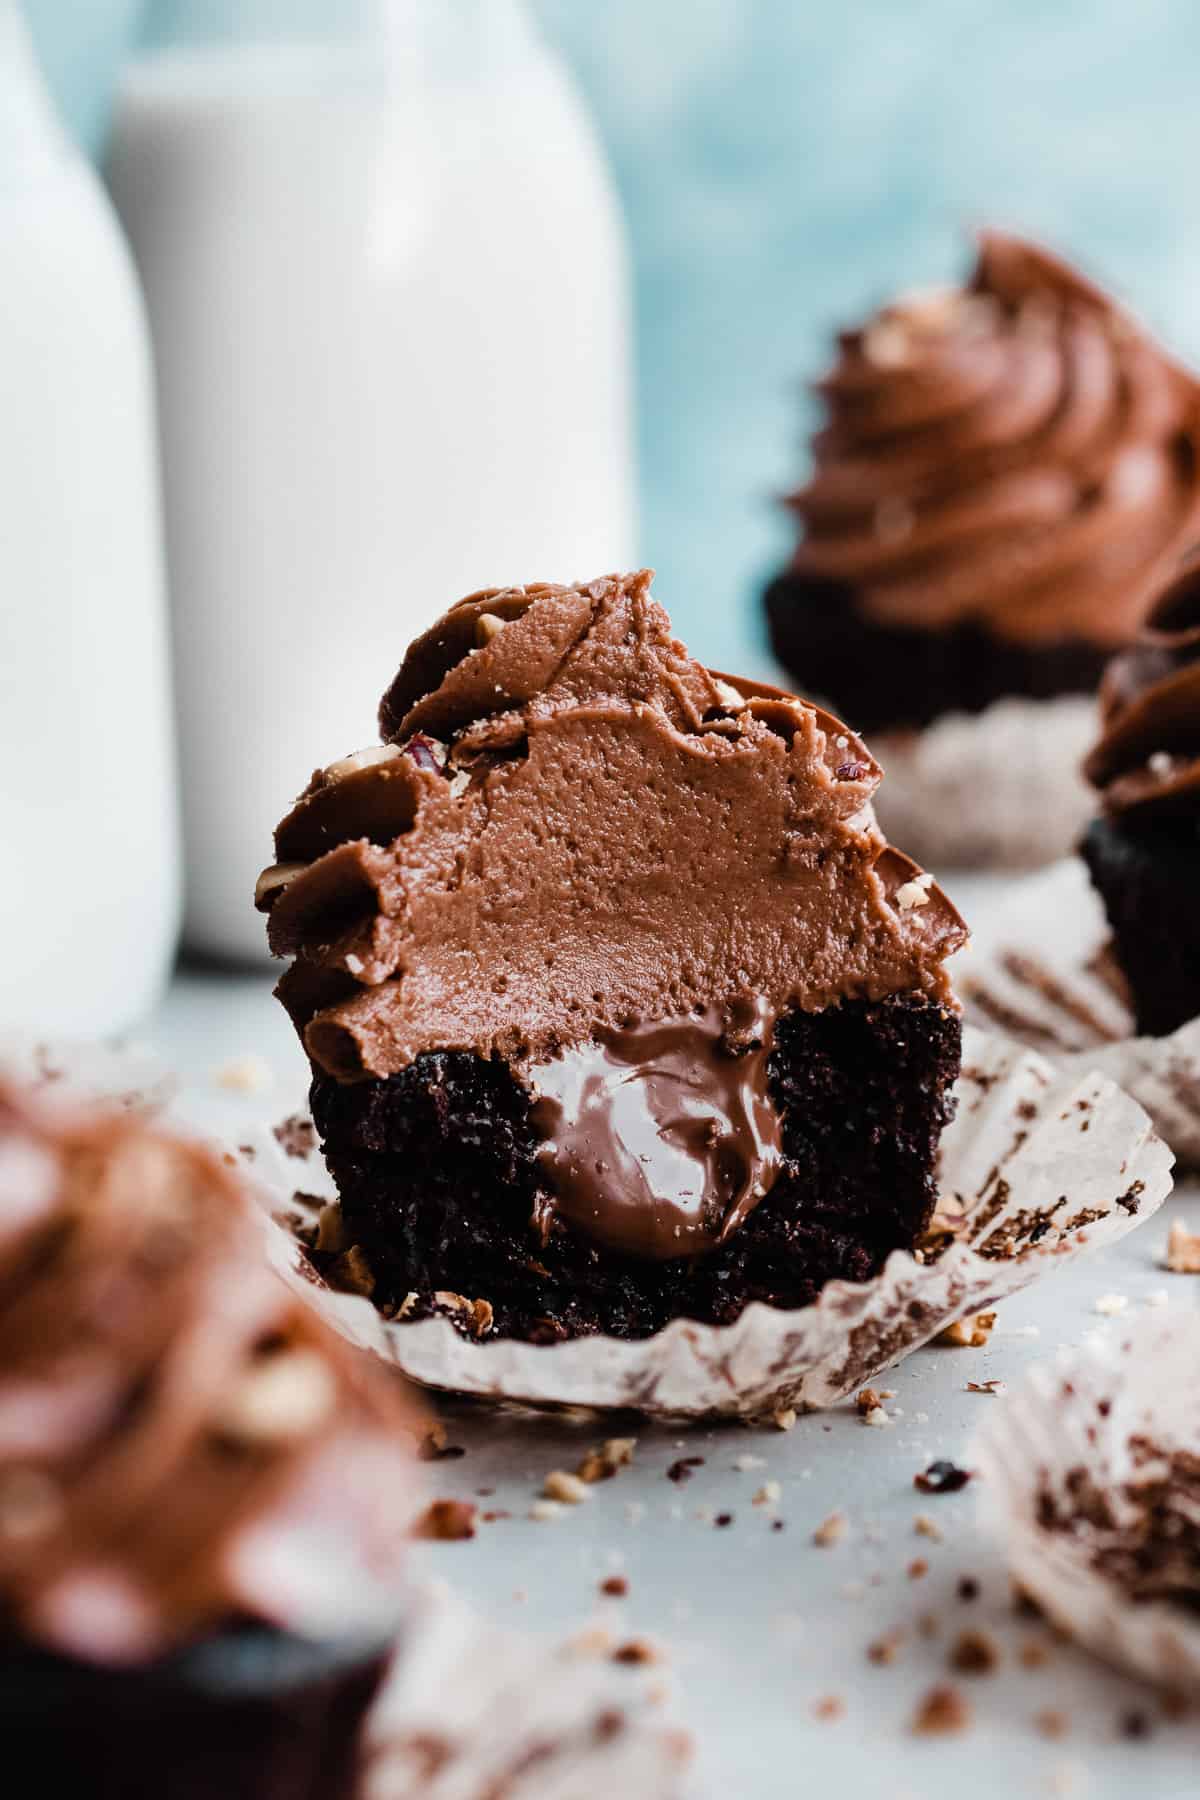 A nutella cupcake with a bite missing and gooey nutella showing in the center.